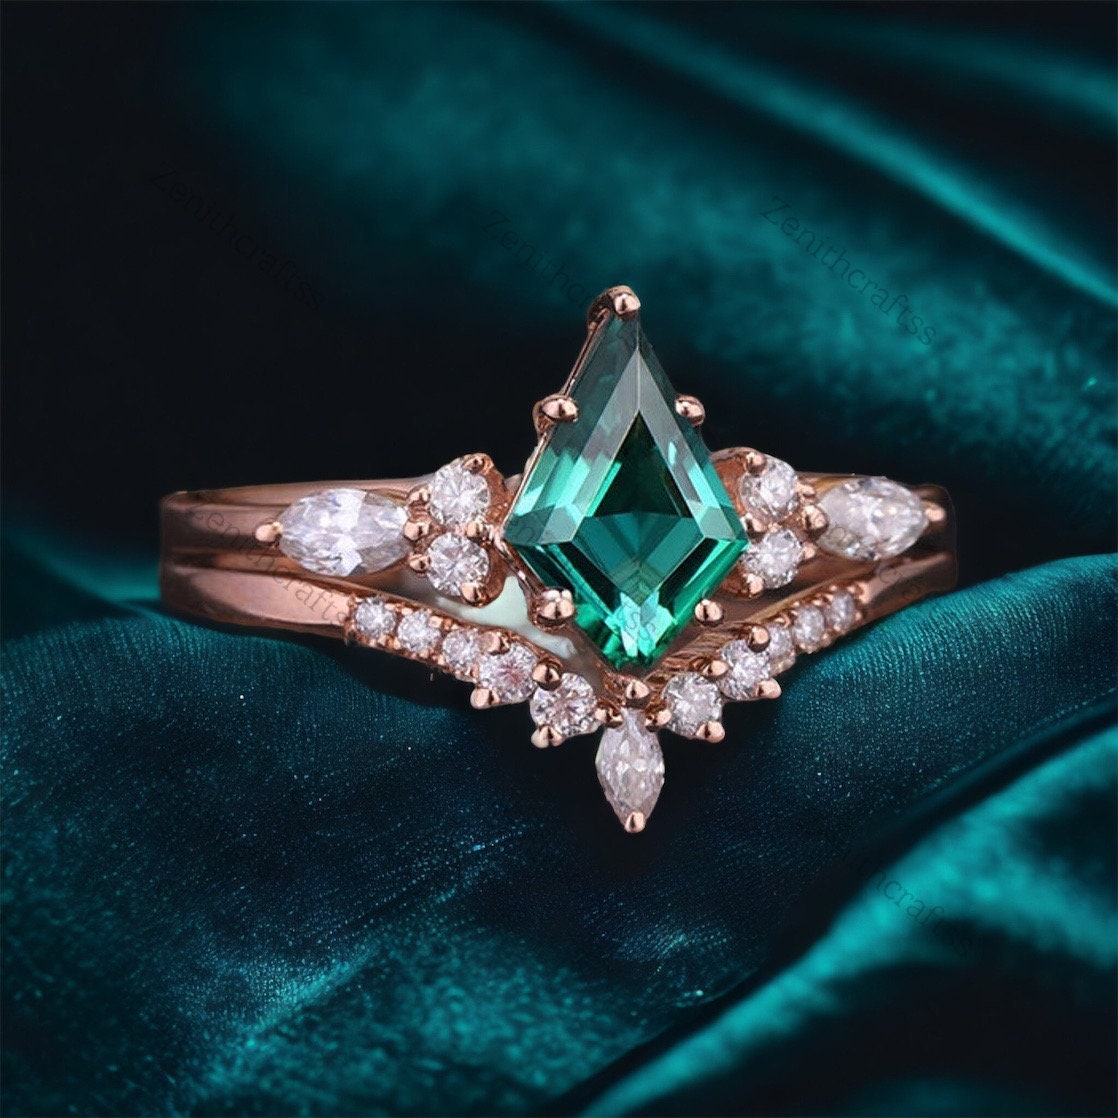 Kite Cut Emerald Engagement Ring Hexagon Shaped Unique Emerald Ring Vintage  Gold Ring Bridal Ring Art Deco Antique Wedding Ring for Women - Etsy |  Hexagon engagement ring, Dragon ring engagement, Emerald